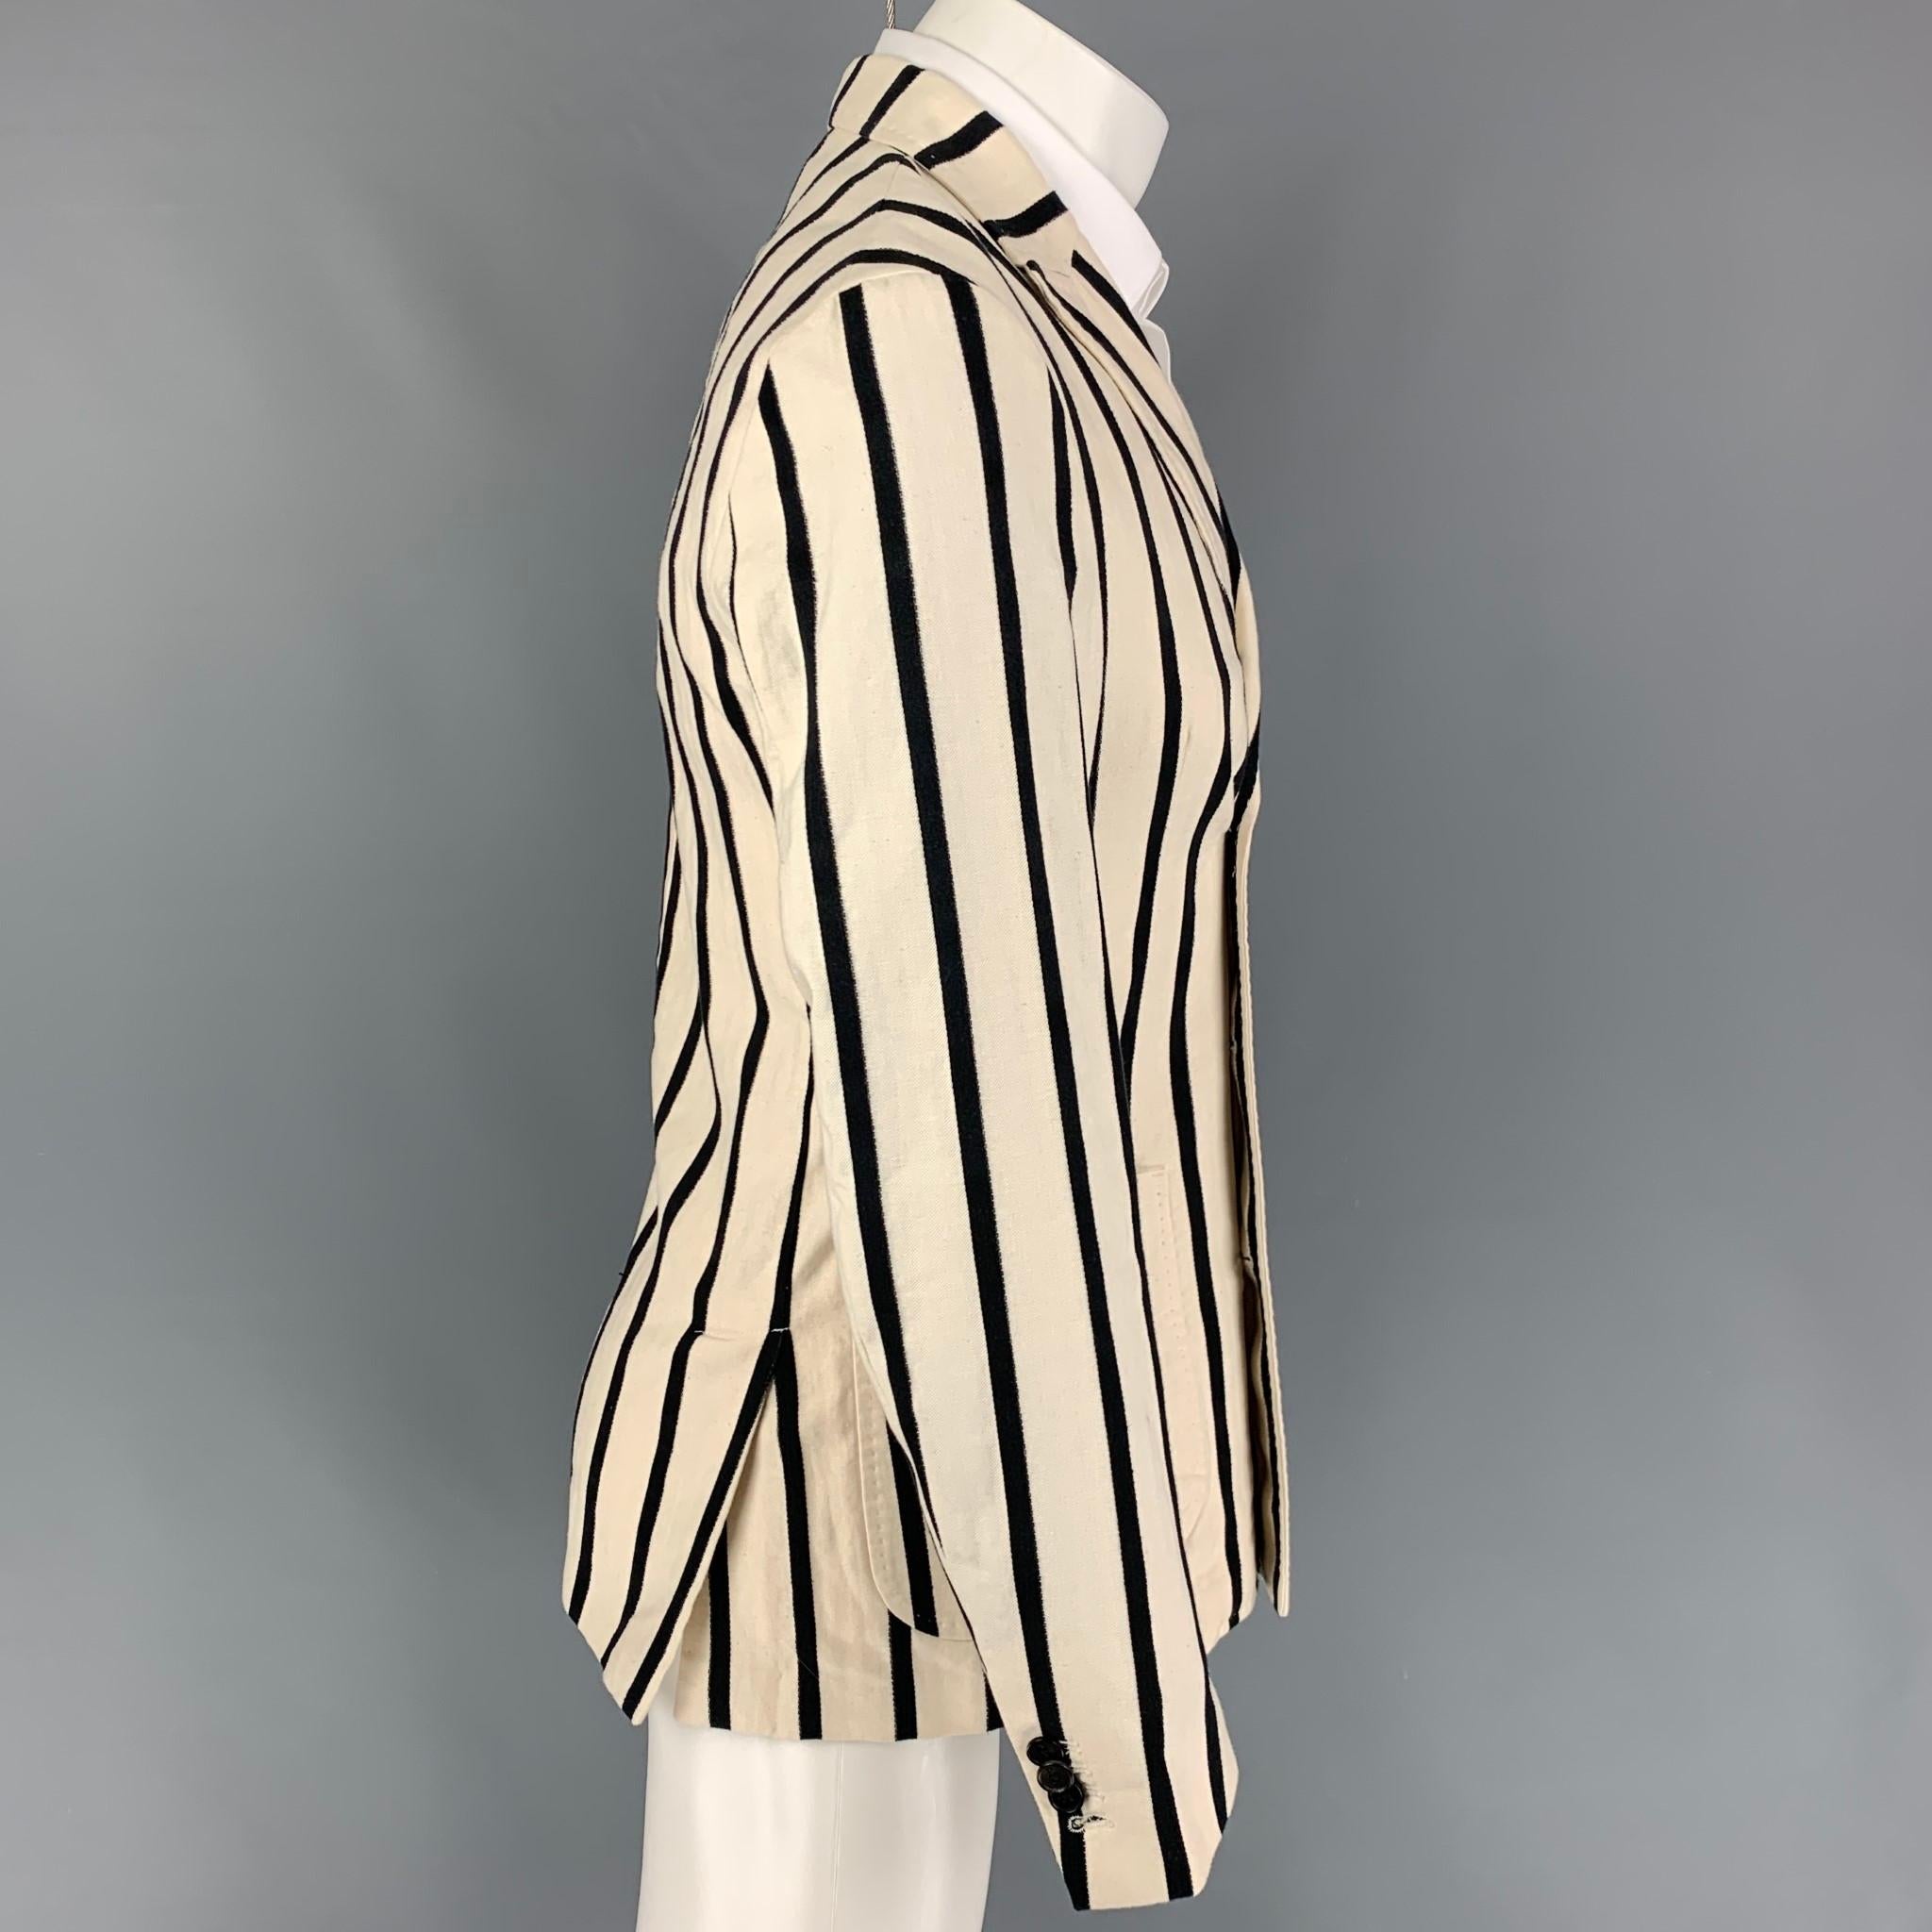 SCOTCH AND SODA sport coat comes in a beige & black stripe cotto / linen with a half liner featuring a peak lapel, patch pockets, double back vent, and a double breasted closure. 

Very Good Pre-Owned Condition.
Marked: M

Measurements:

Shoulder: